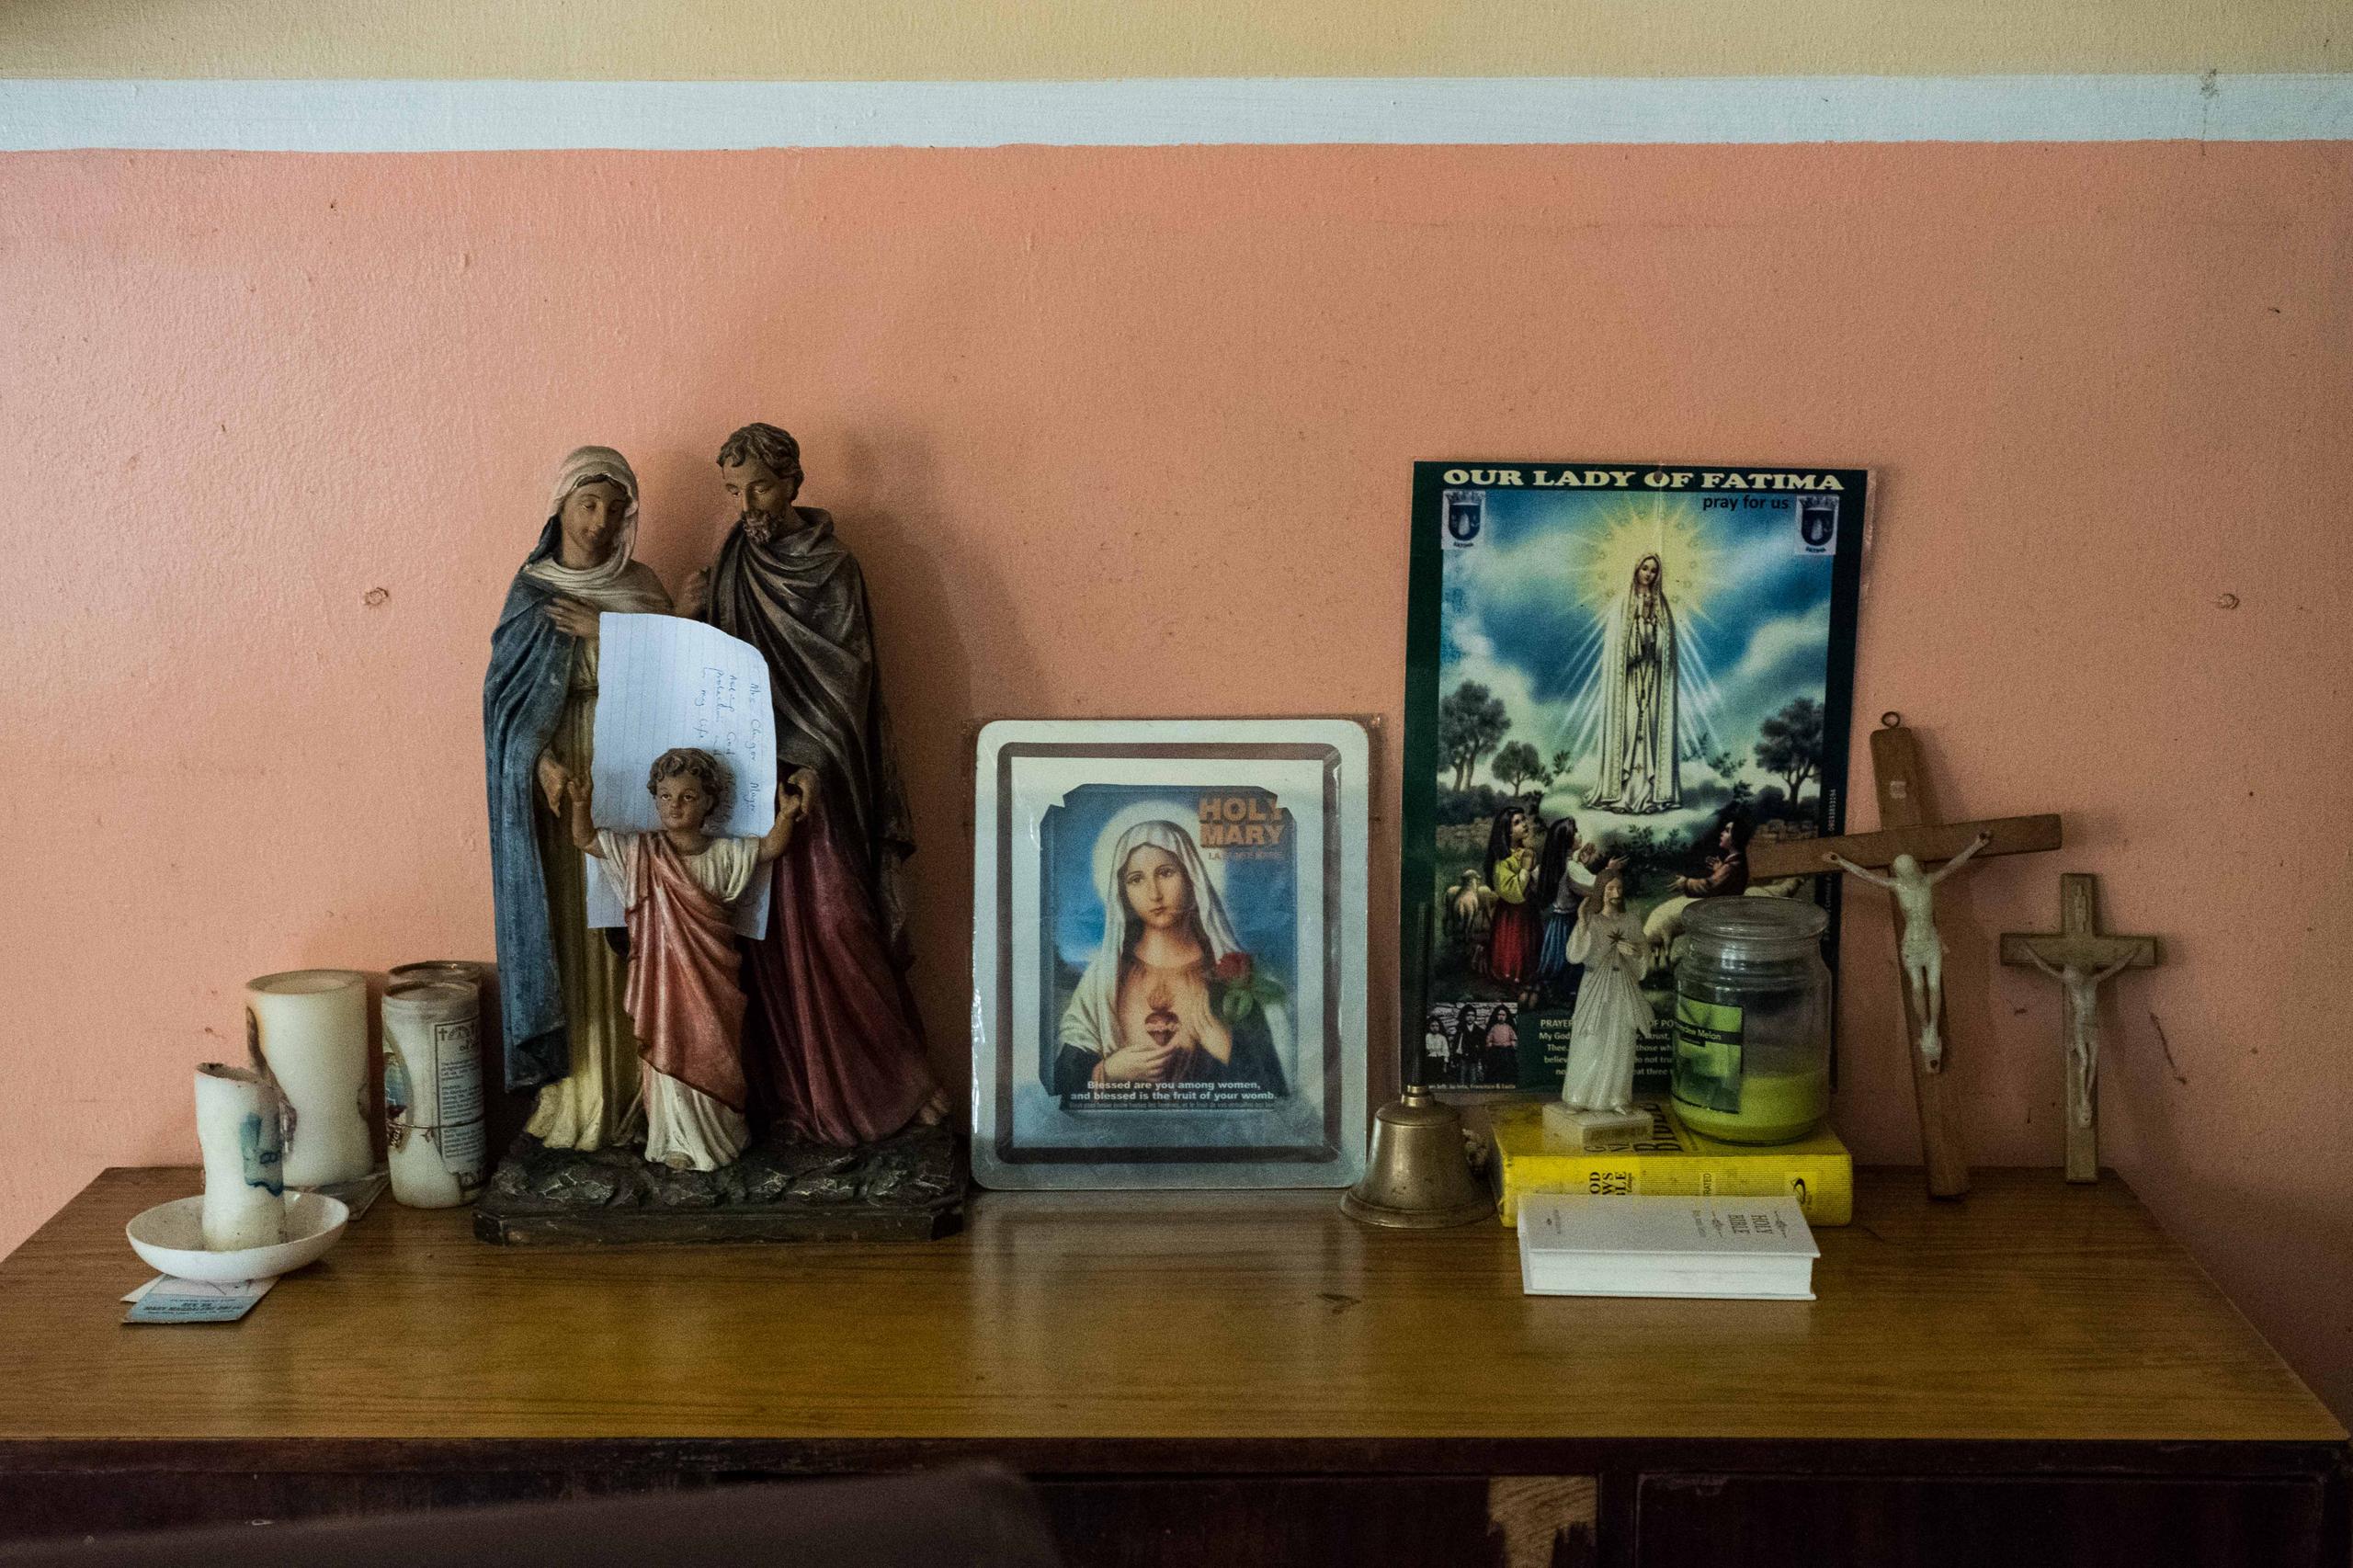 An alter in someones home.